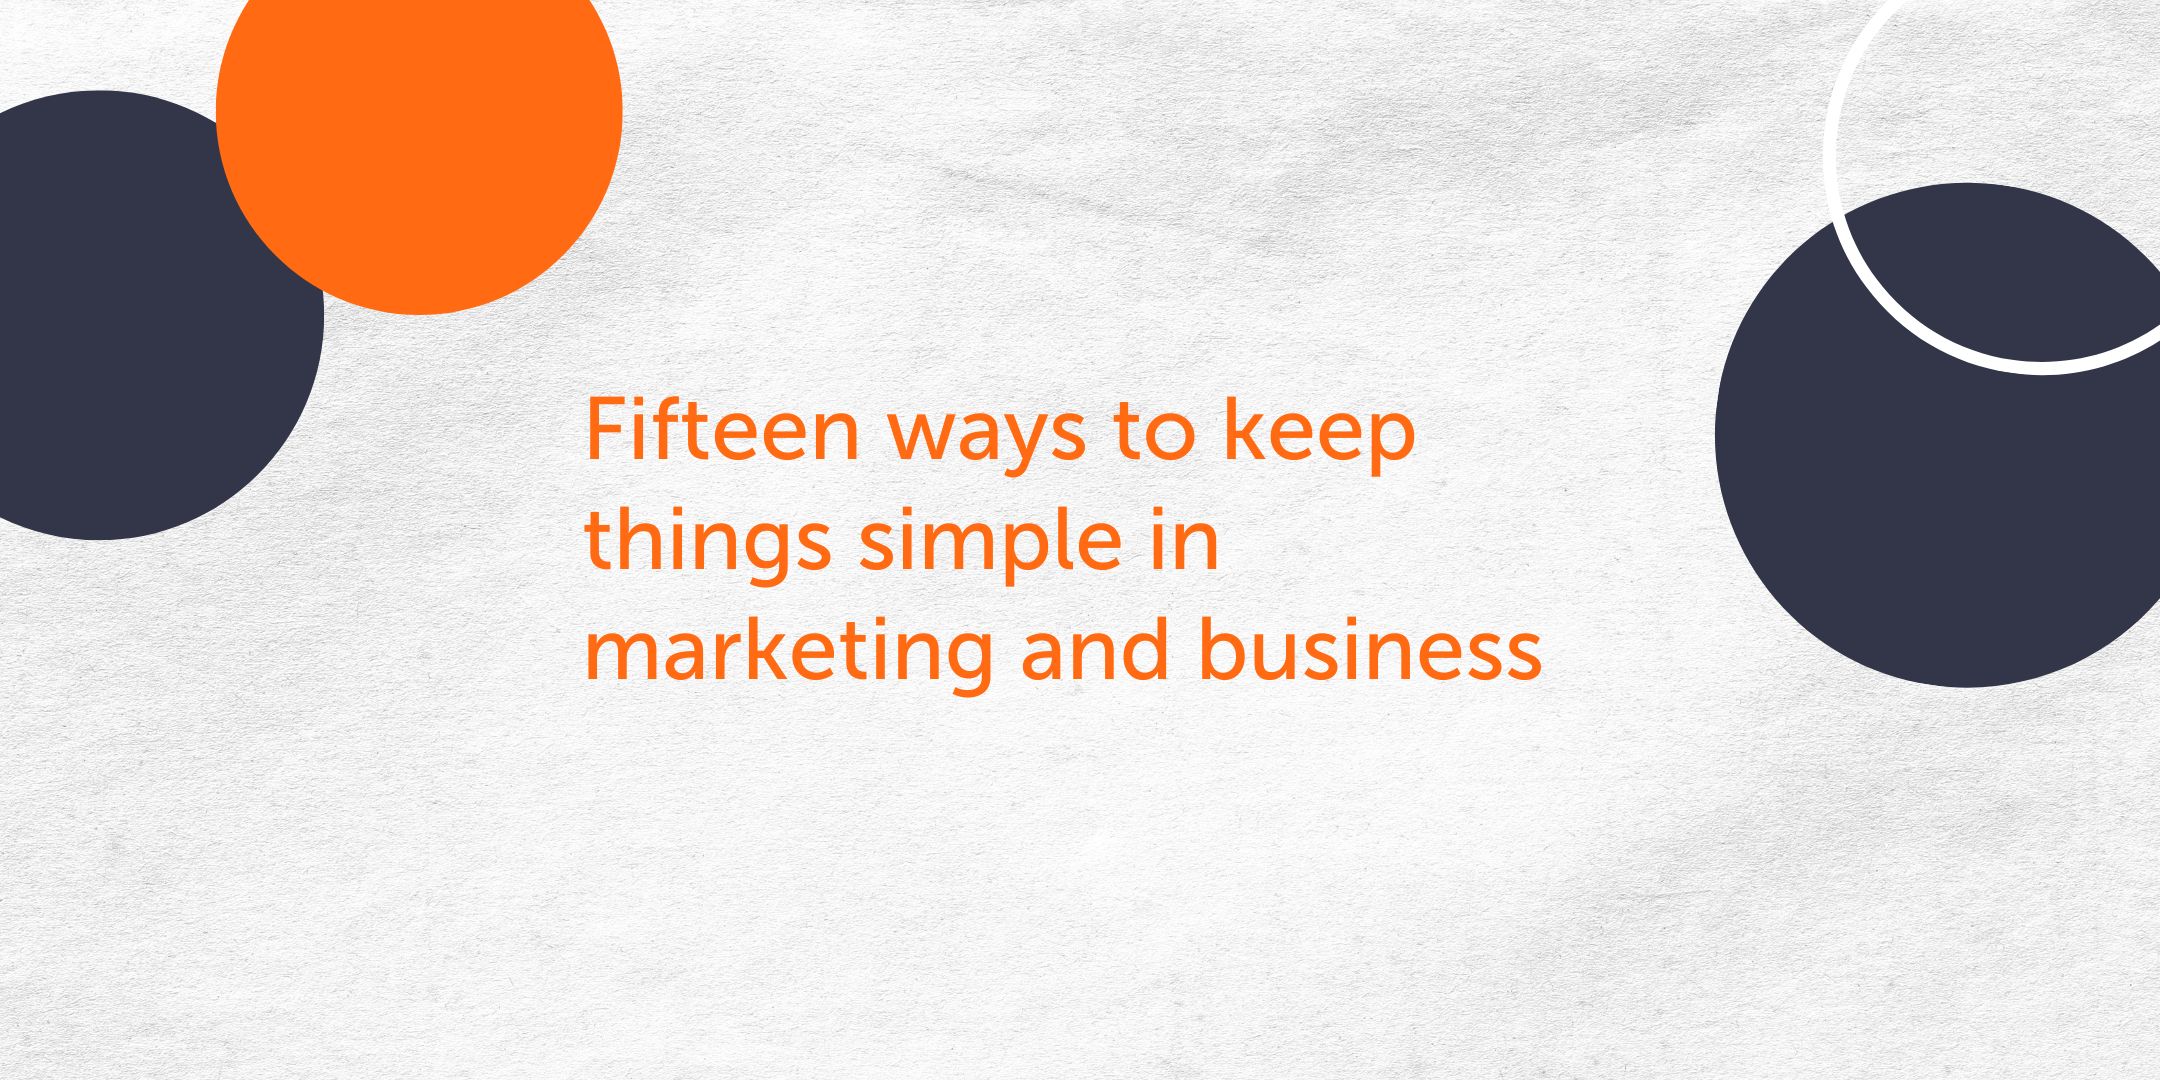 Fifteen ways to keep things simple in marketing and business